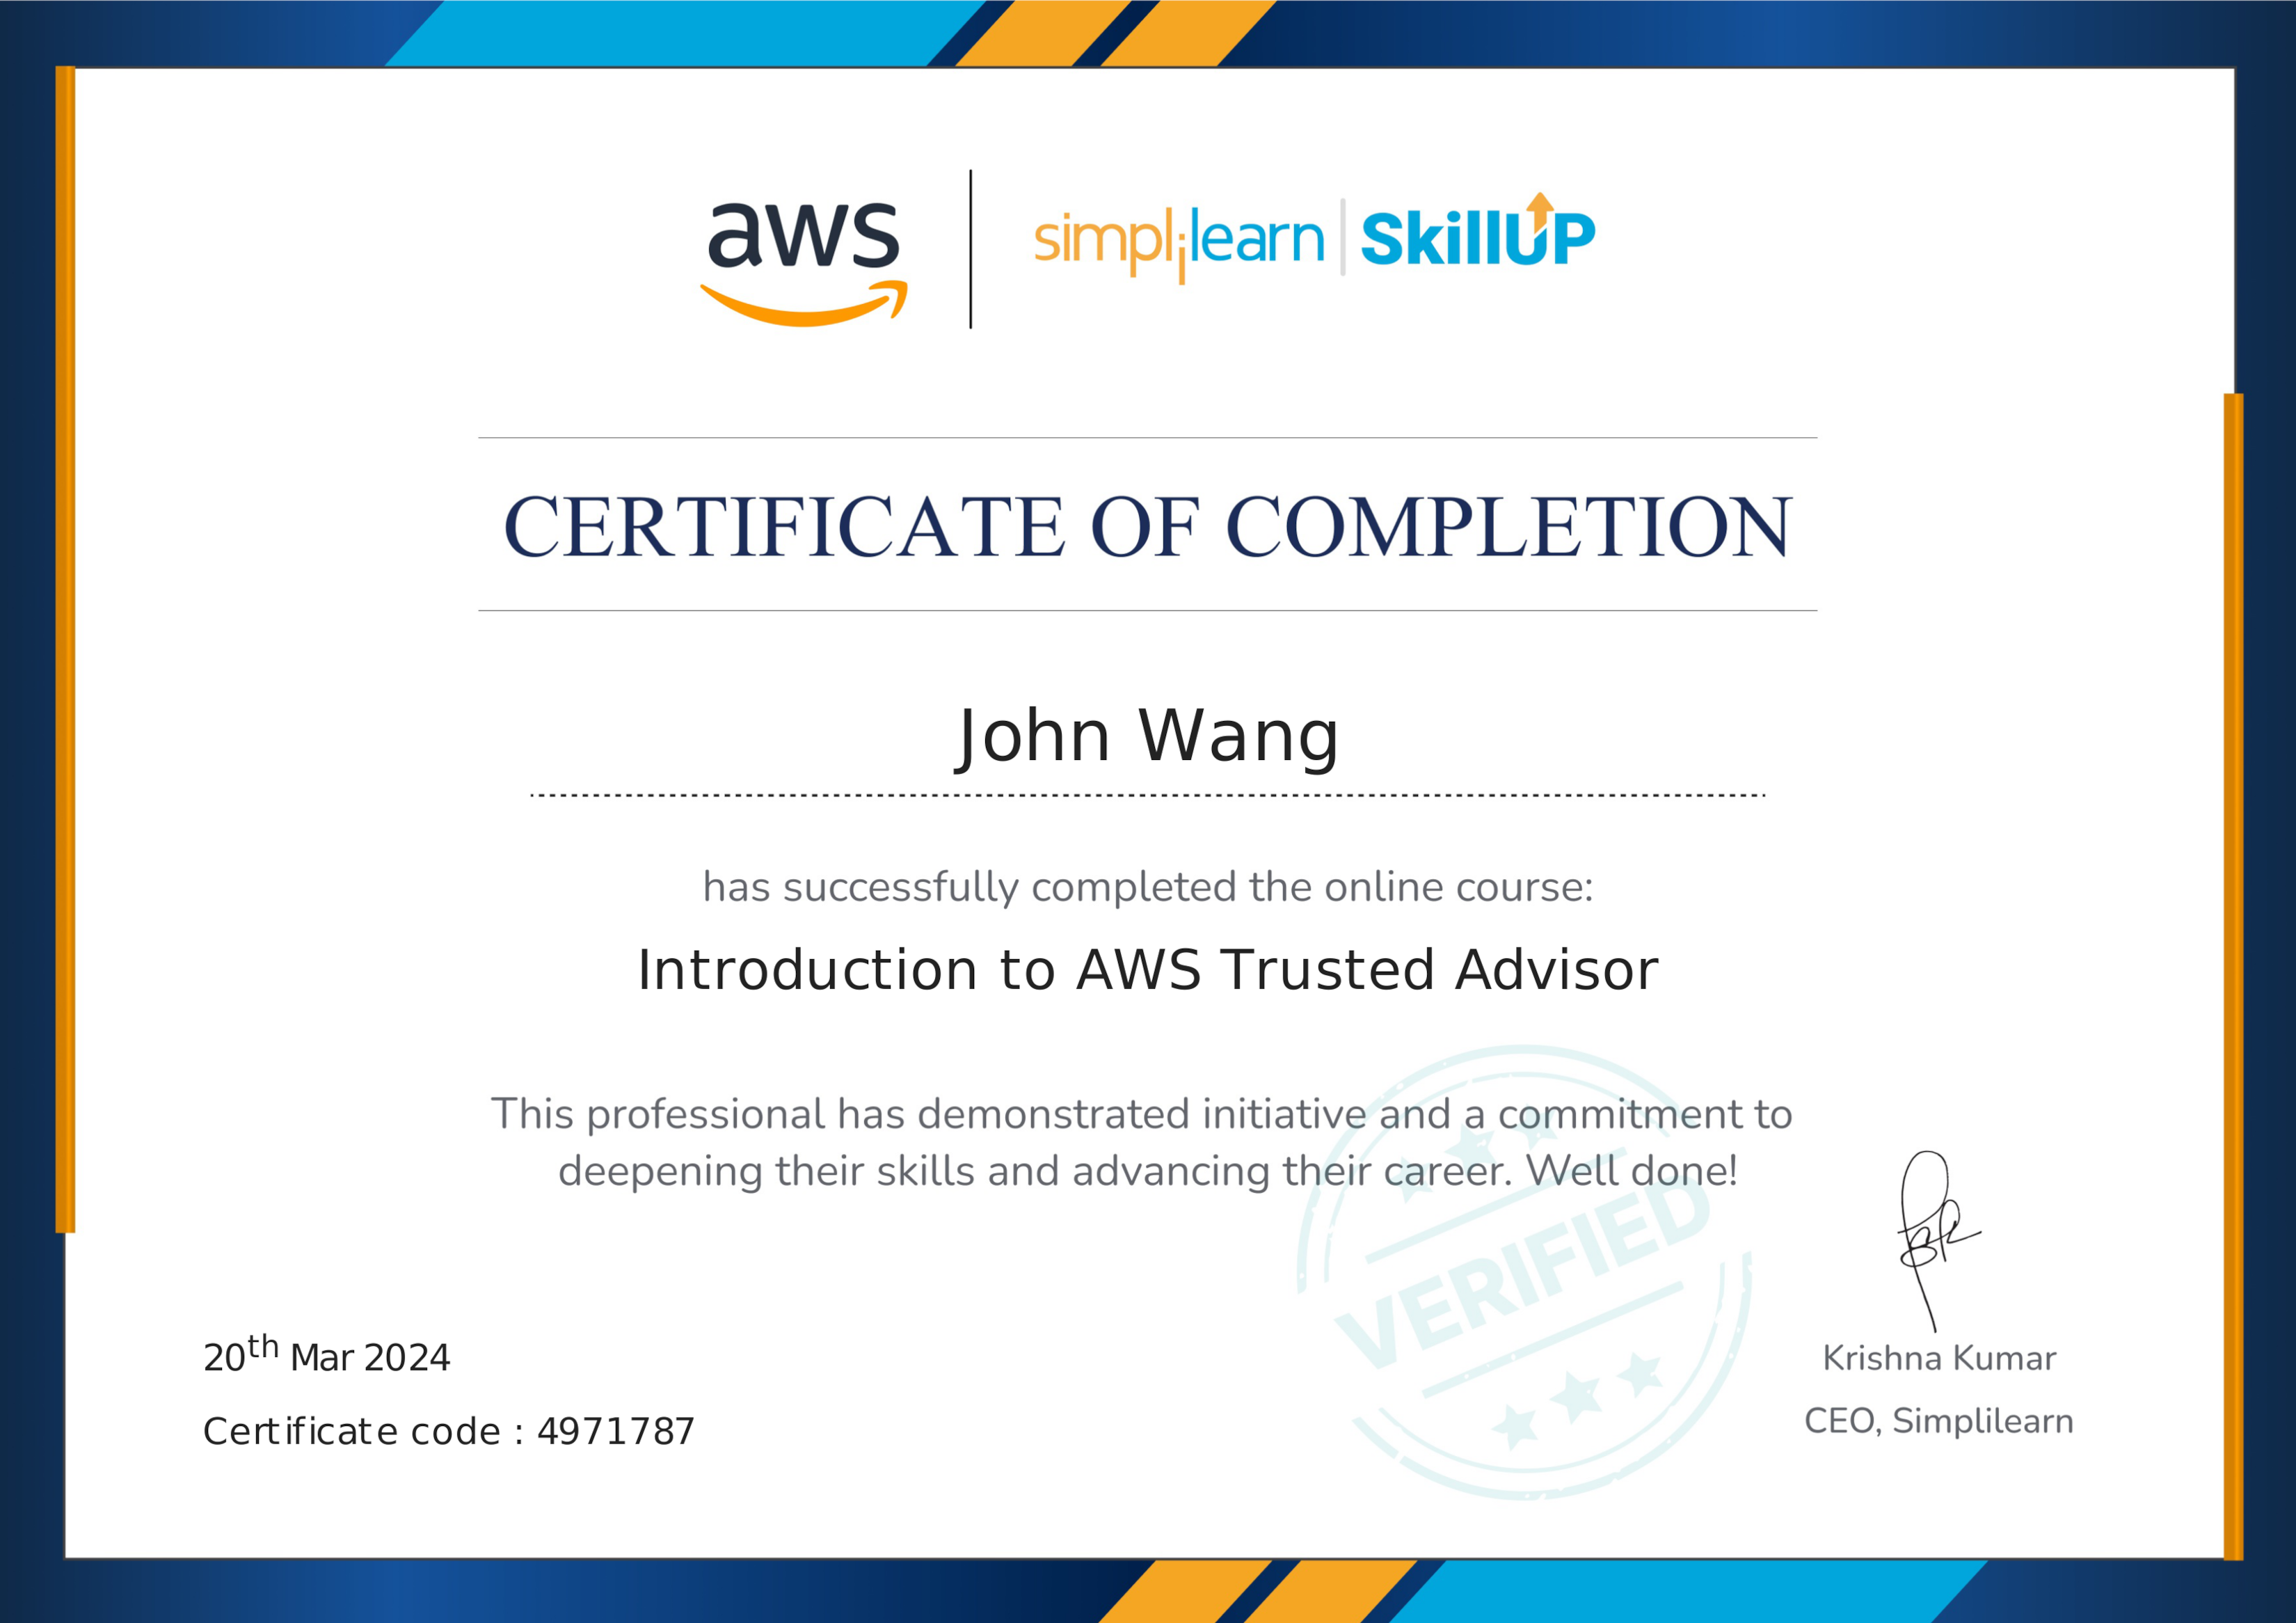 John's Introduction to AWS Trusted Advisor from Simplilearn